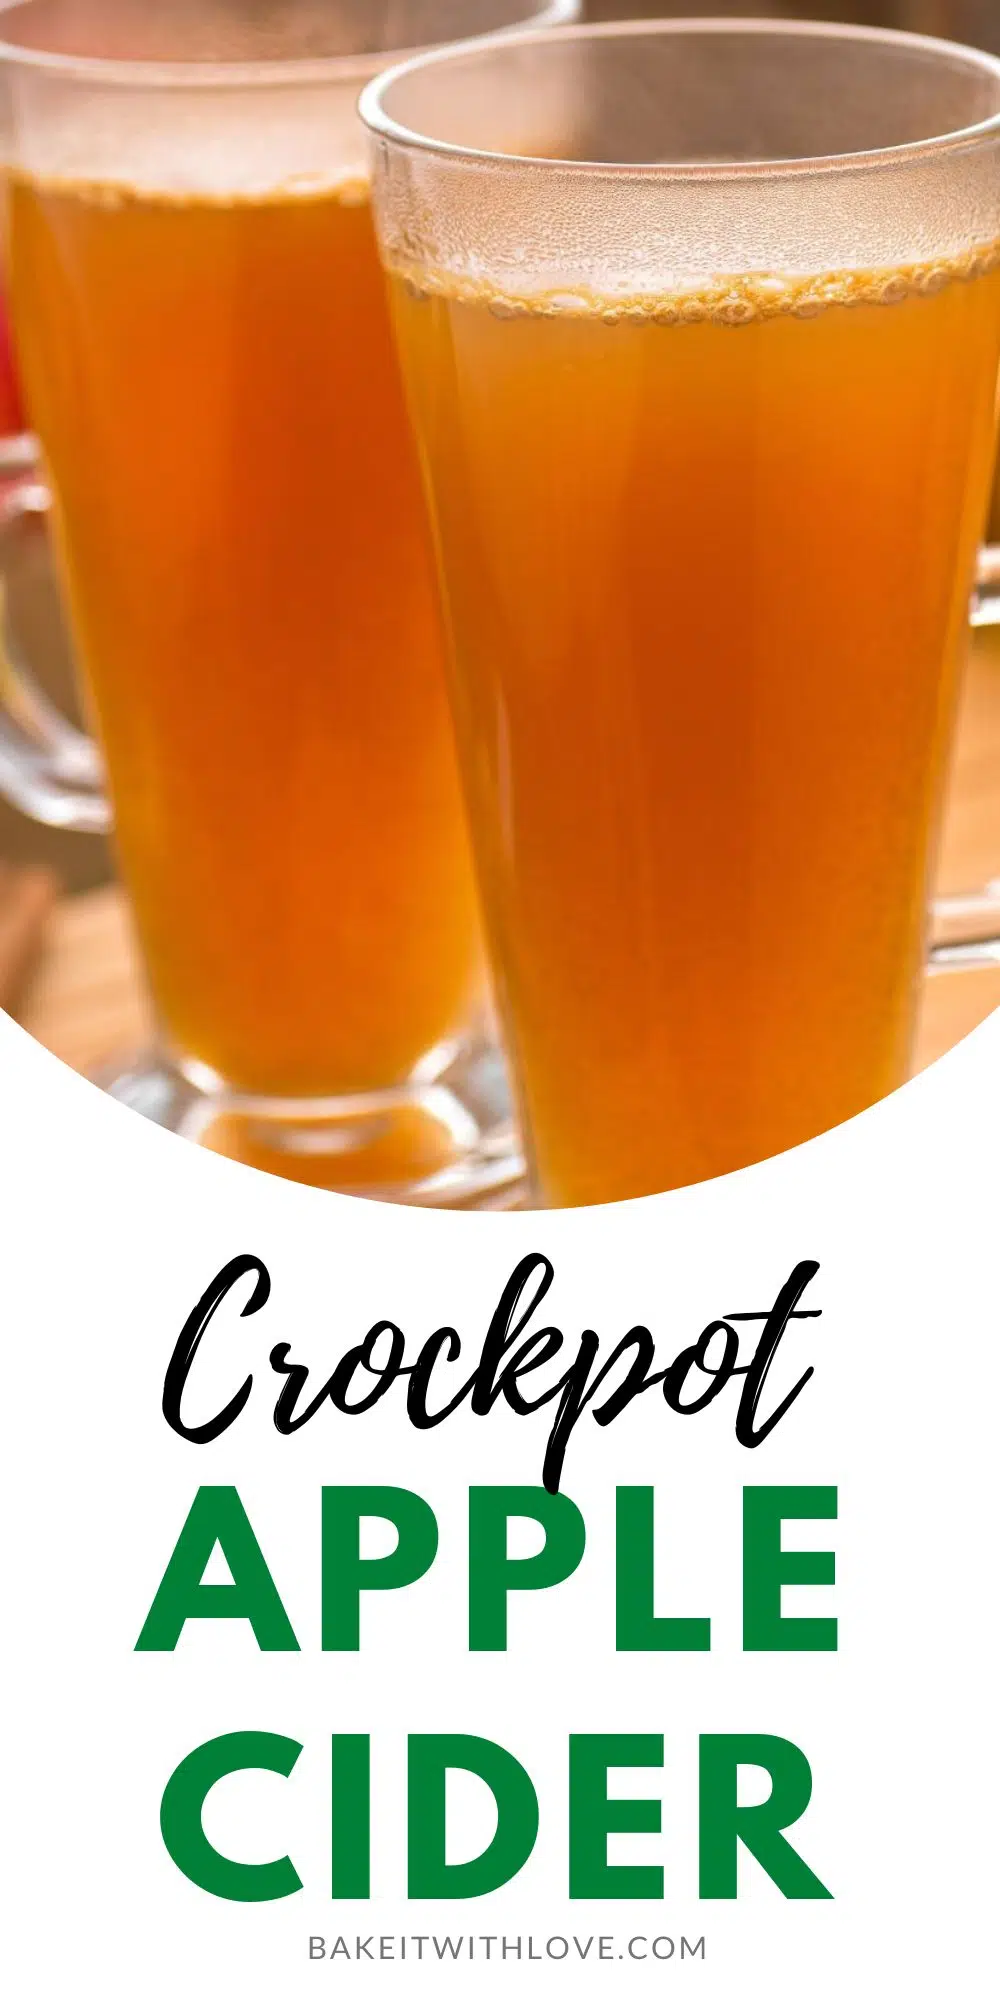 Pin image with text of crockpot apple cider.